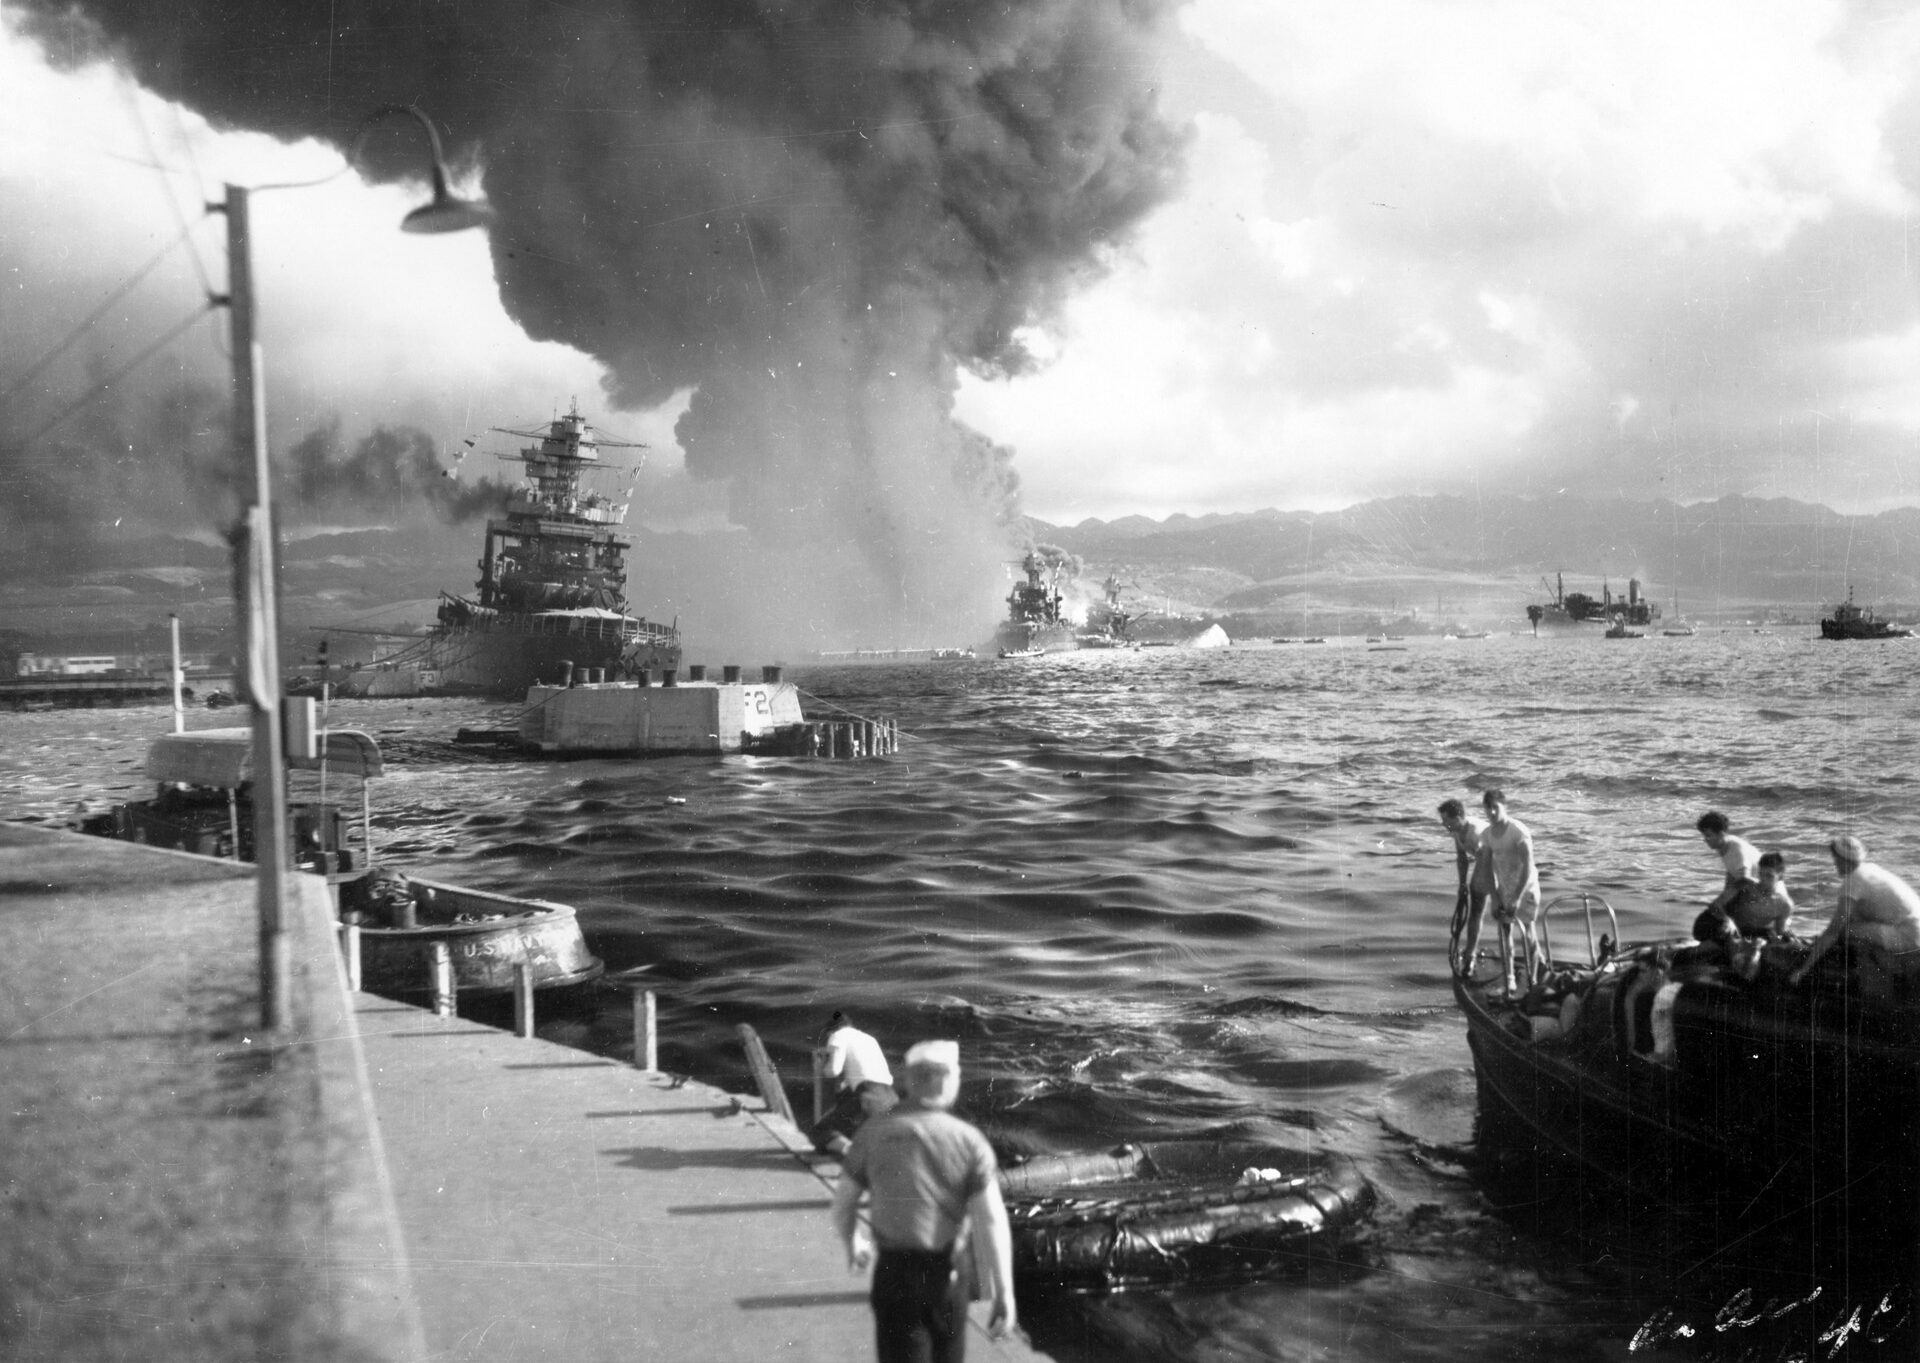 California lies listing at left in this photo after taking two torpedo hits during the Pearl Harbor attack. Beyond California lies the damaged battleship Maryland with the capsized hull of the Oklahoma to the right. The fleet oiler Neosho, in the distance at right, backs away from the devastation to remain clear of leaking oil and debris. 